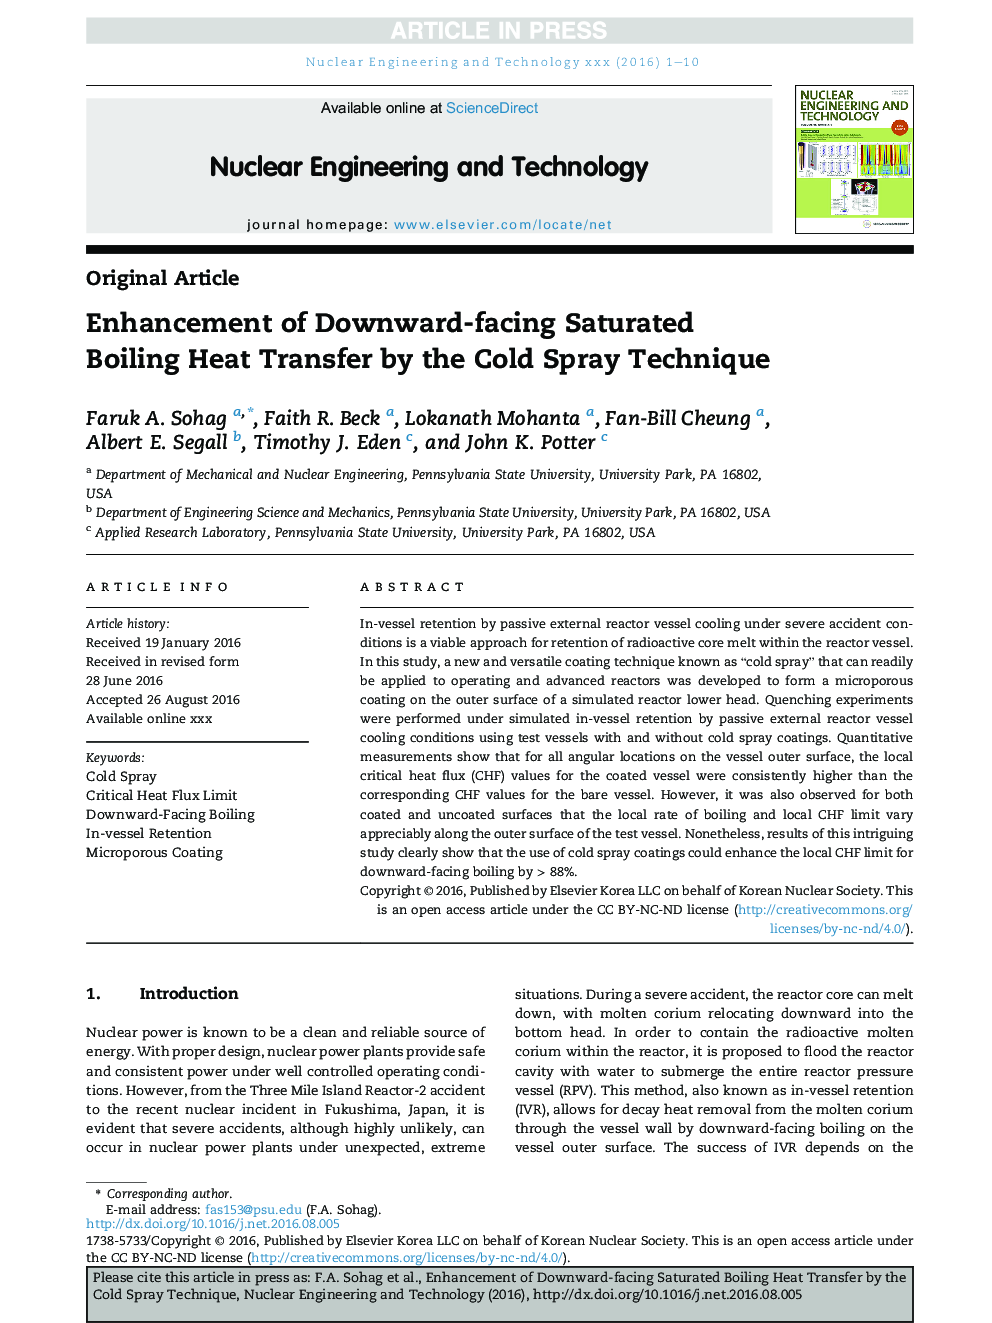 Enhancement of Downward-Facing Saturated Boiling Heat Transfer by the Cold Spray Technique